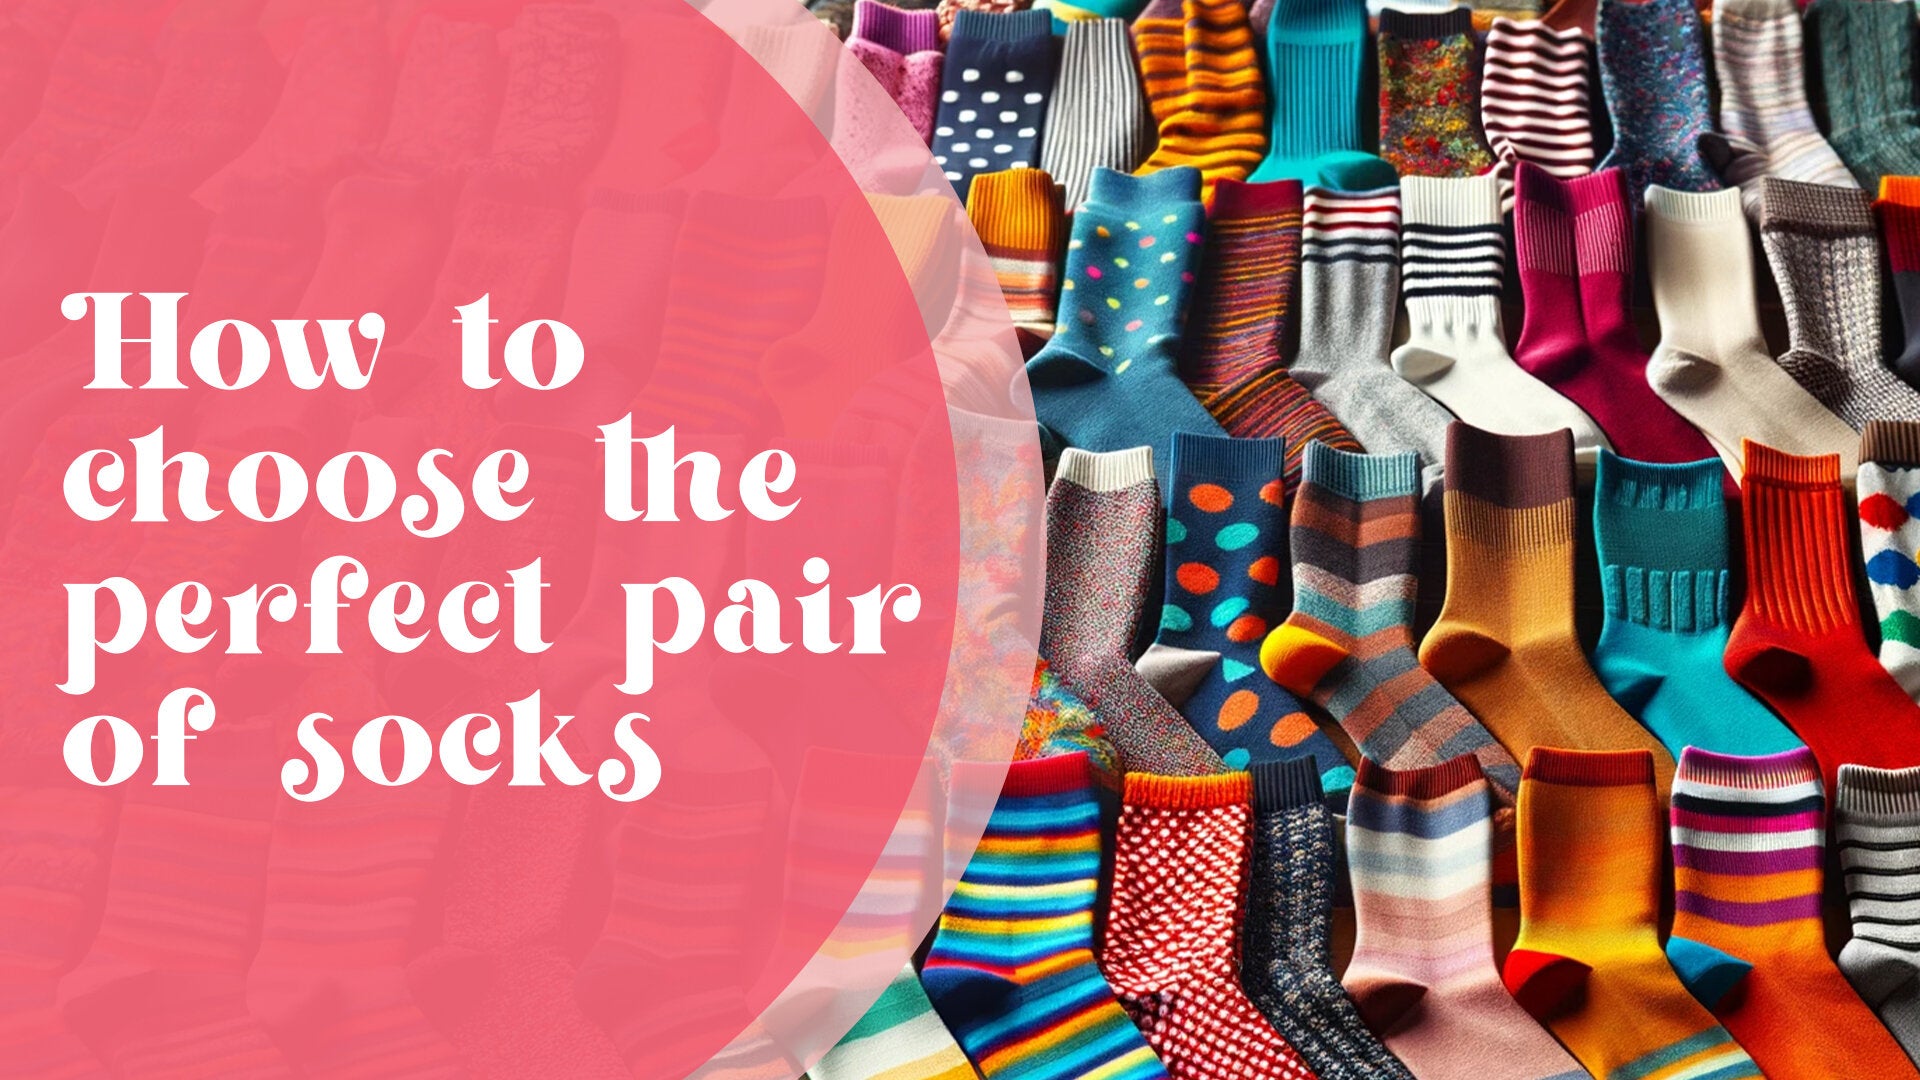 How to choose the perfect pair of socks